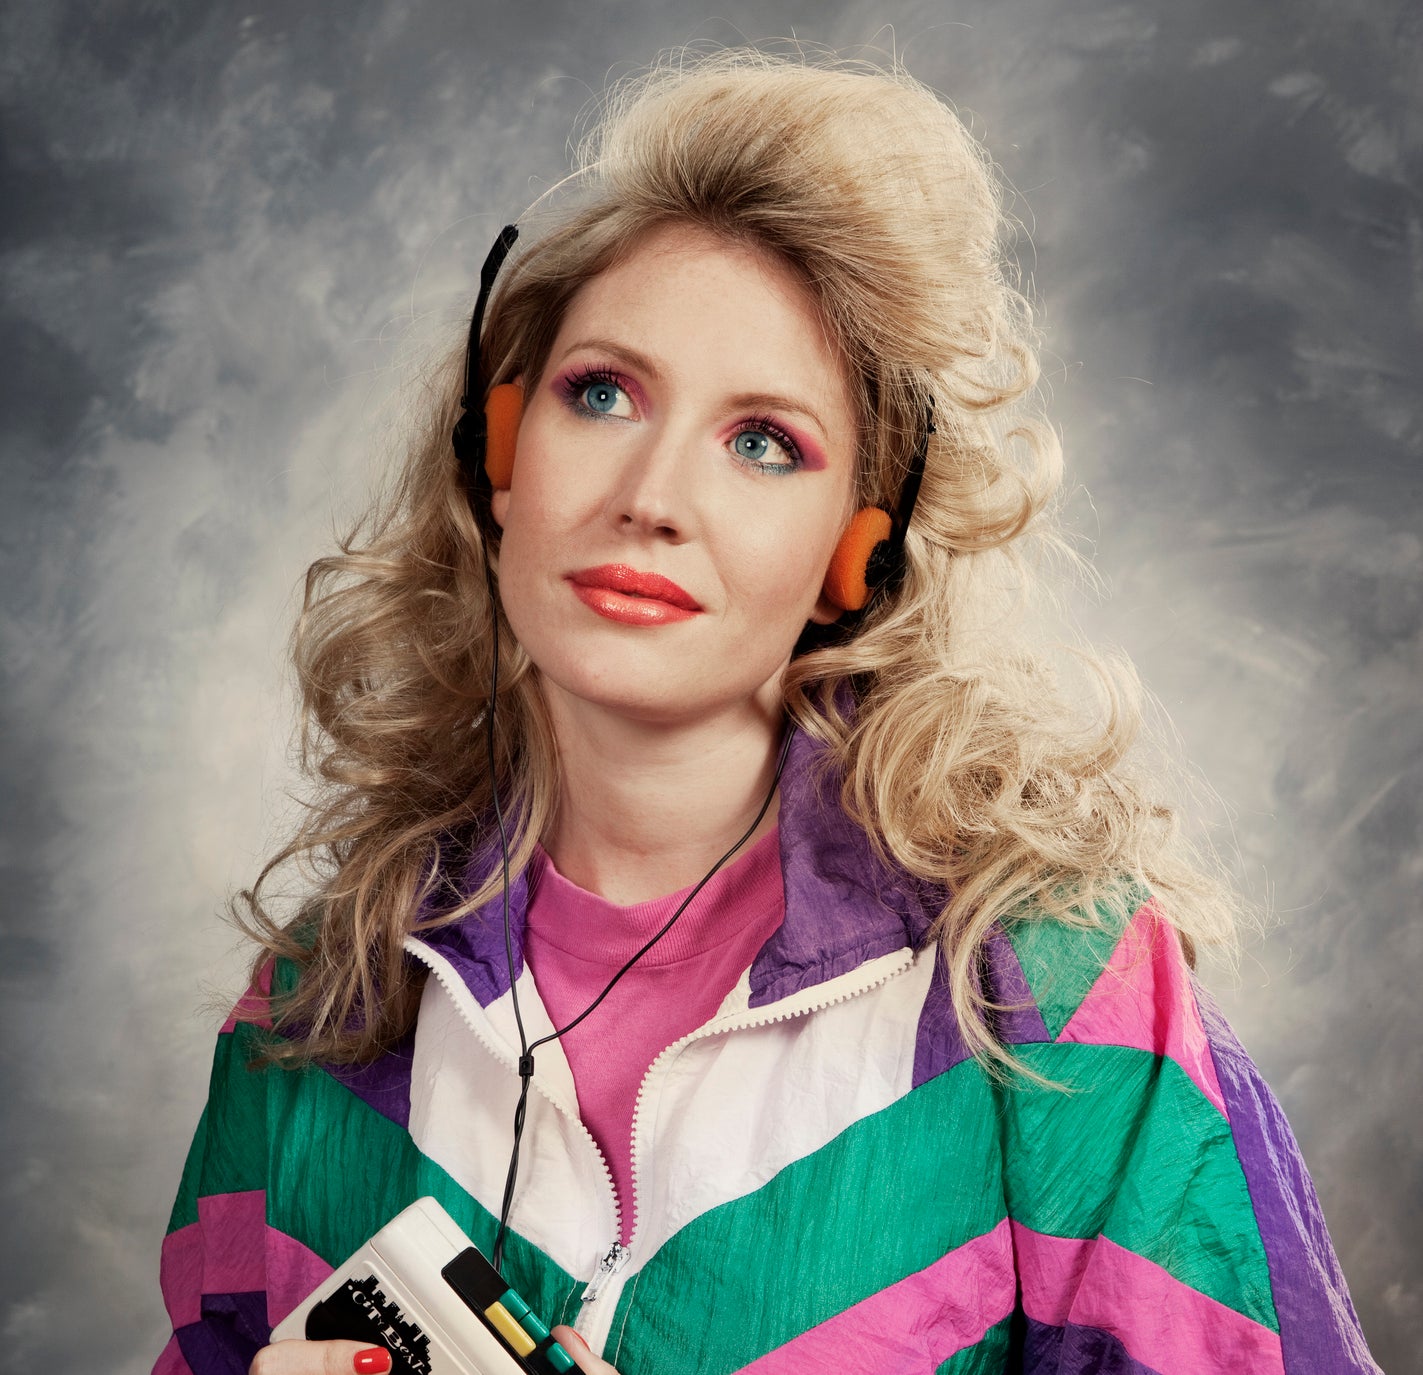 Woman in 1980s style attire holding a cassette player, with retro headphones